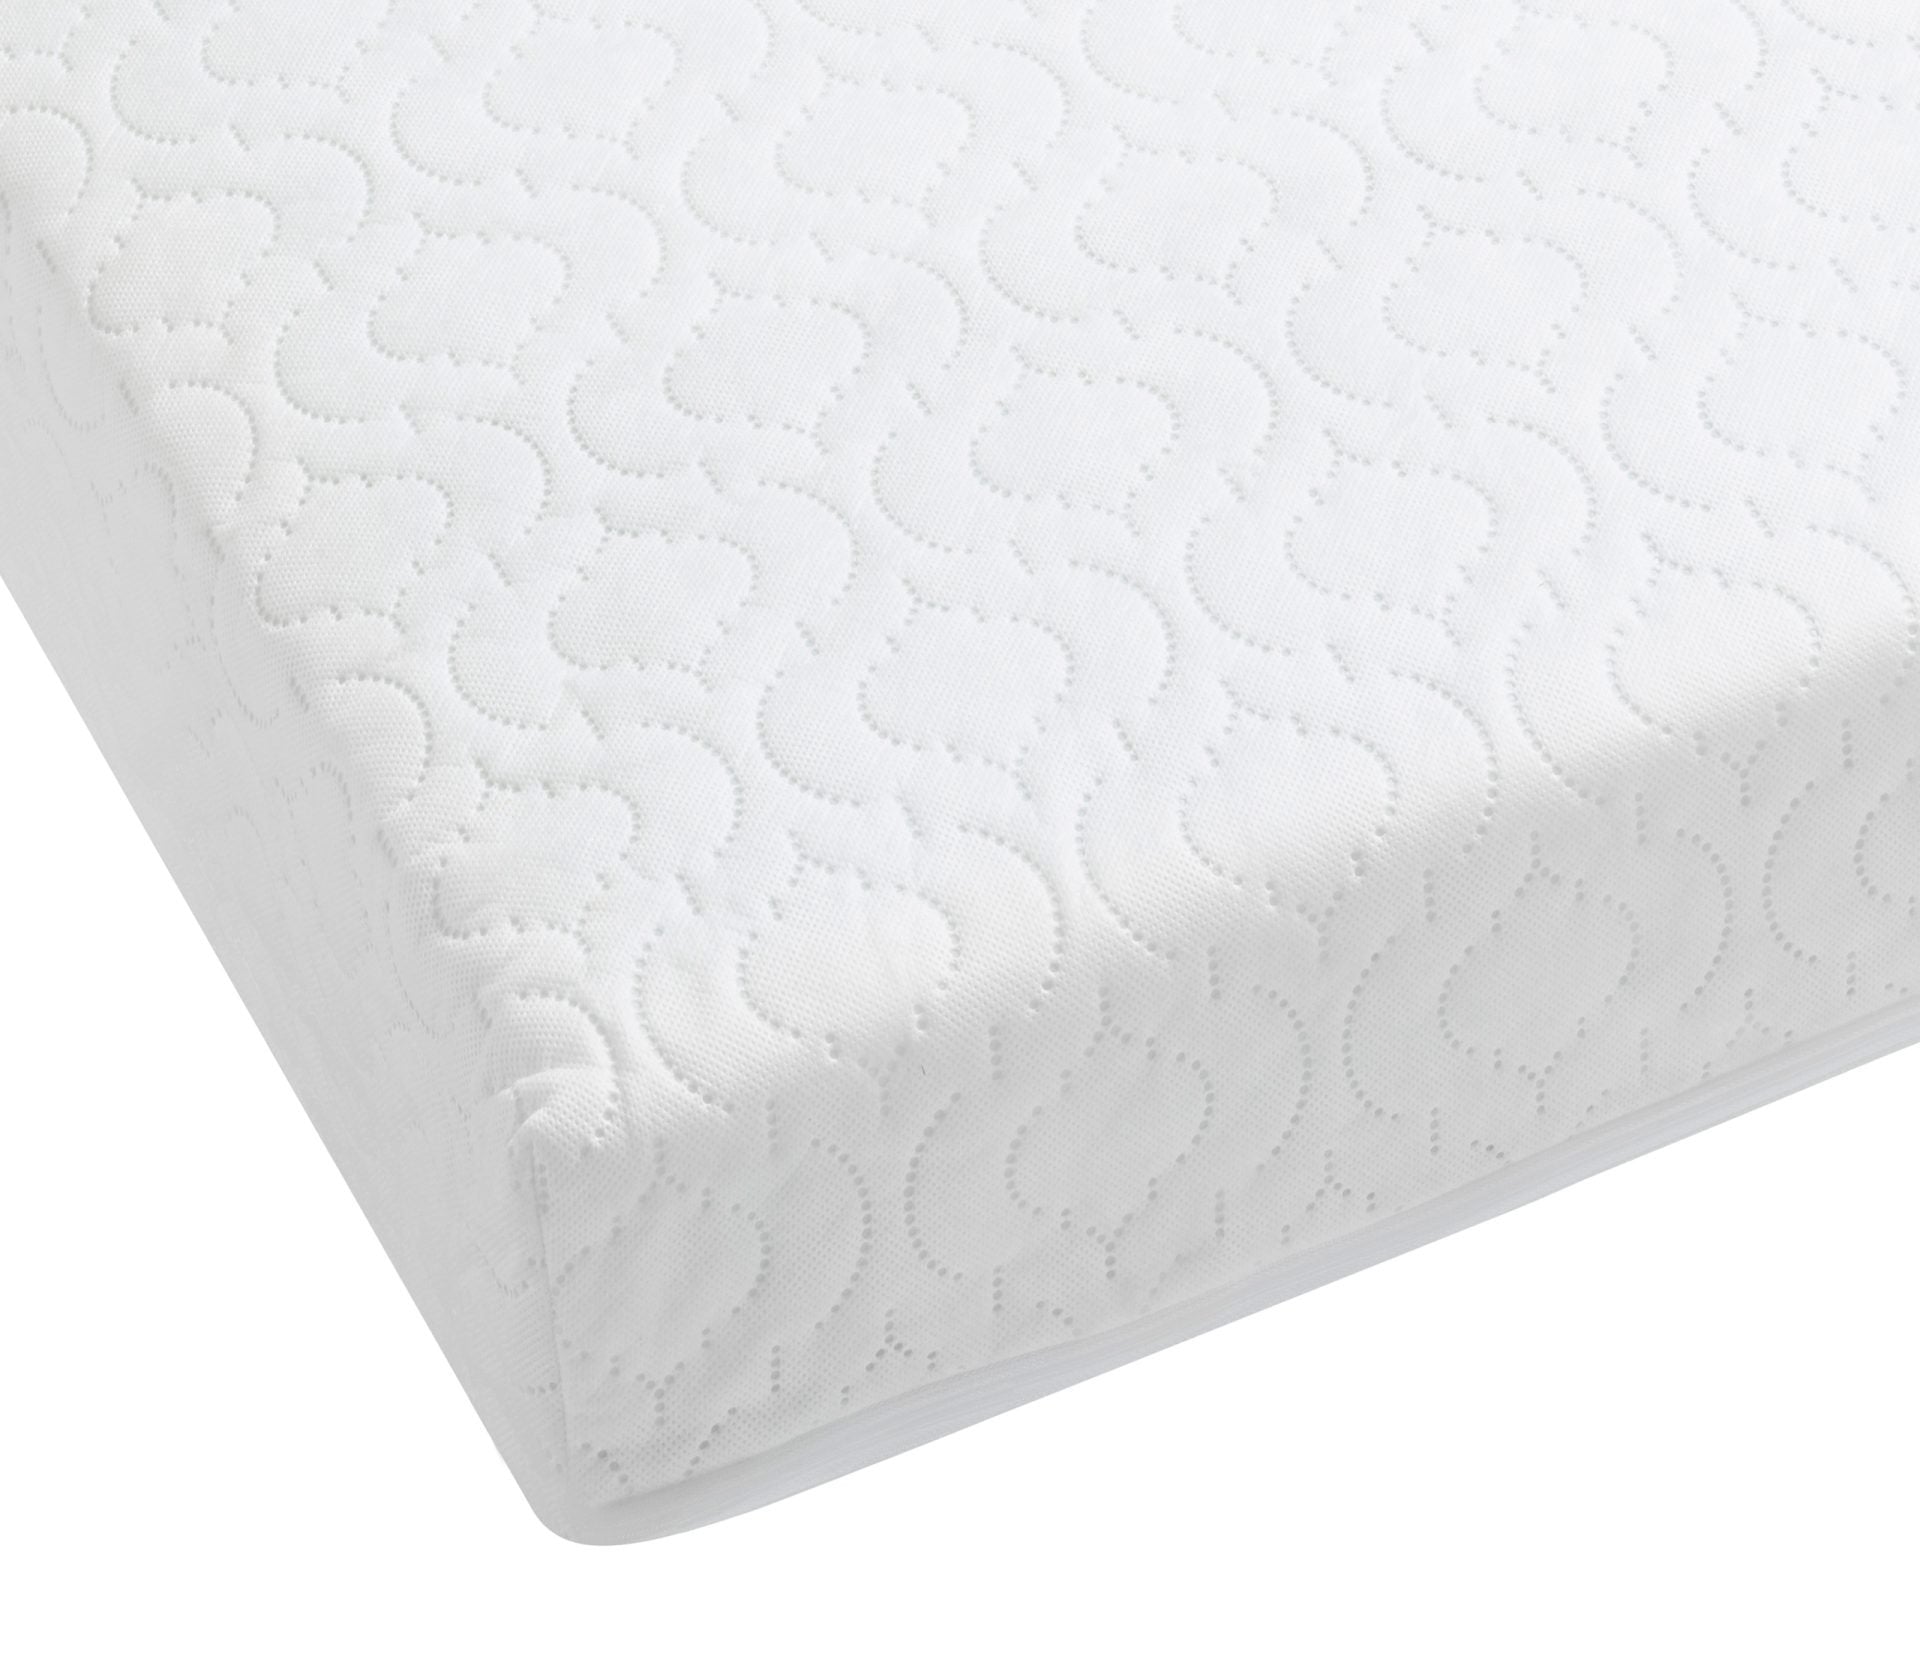 Babymore Deluxe Sprung Cot Bed Mattress - 140 x 70 x 10 CM - Babymore